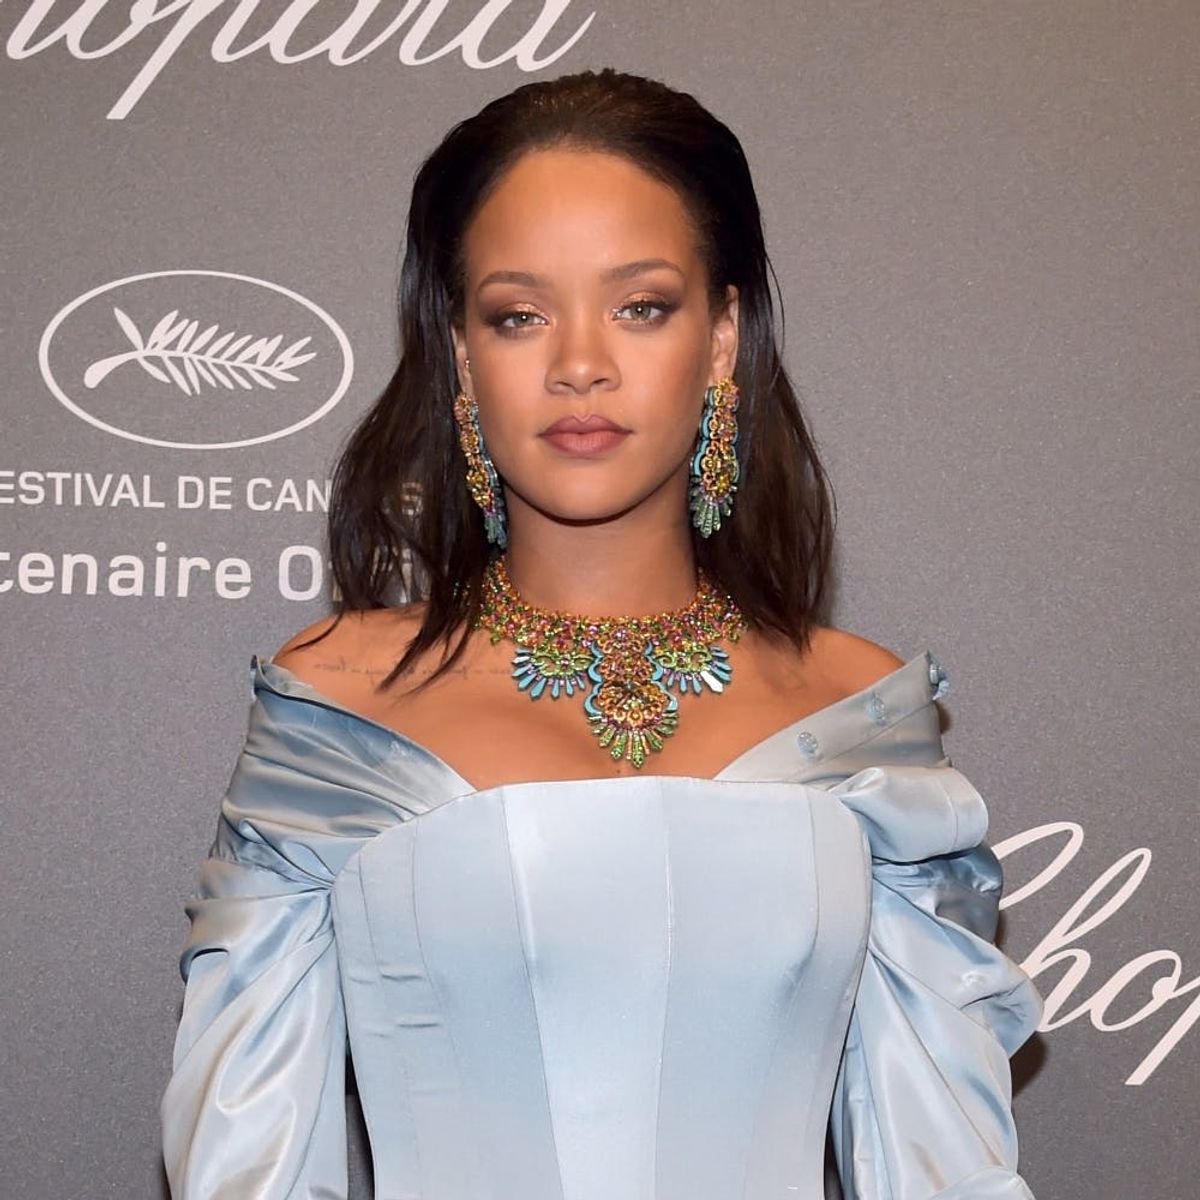 We Now Know the Identity of Rihanna’s New Man